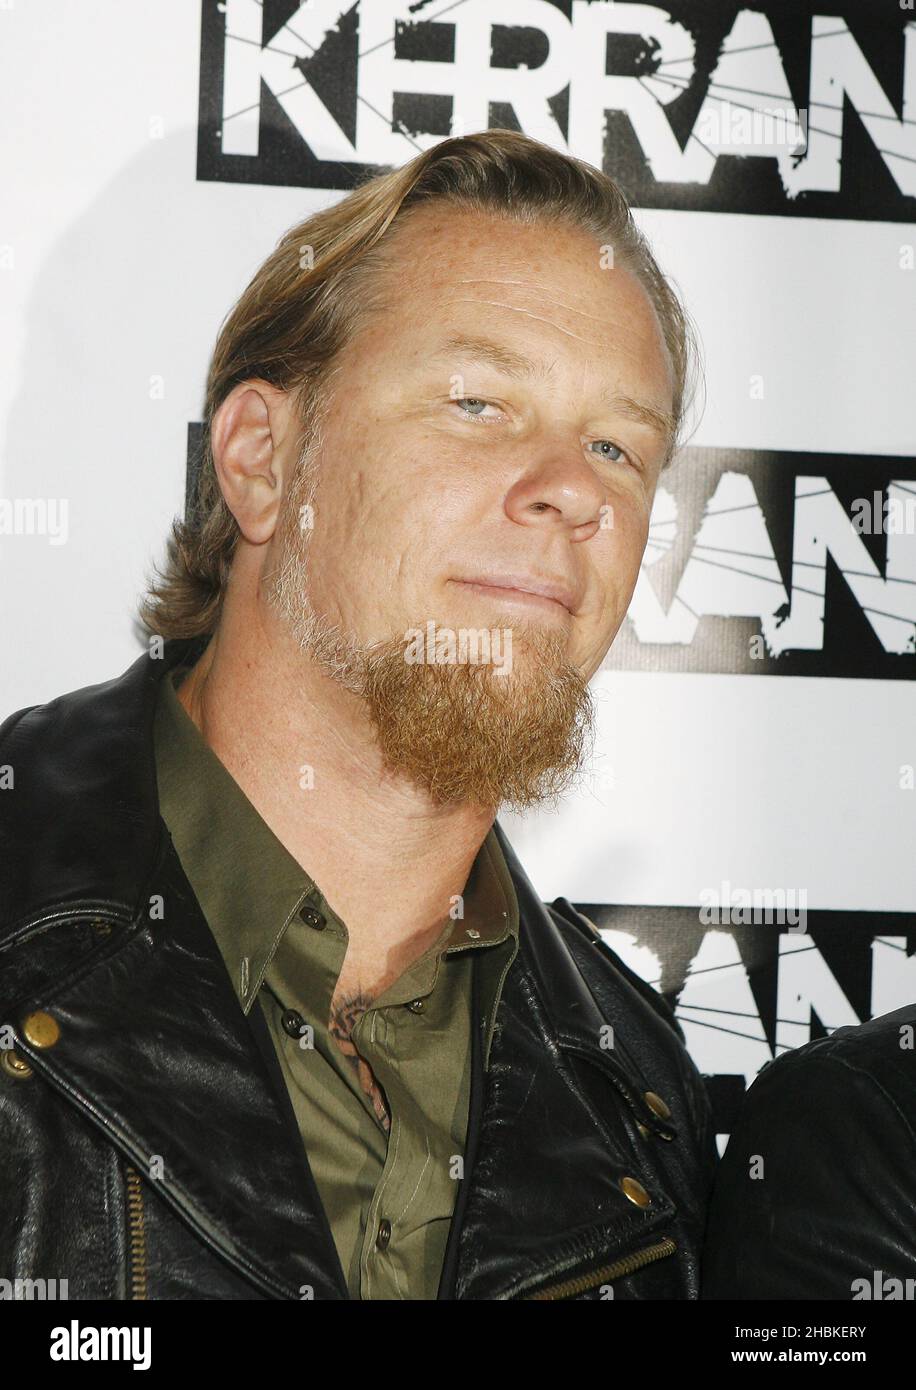 James Hetfield of Metallica arrives for the Kerrang Awards, at the Brewery, London. Stock Photo